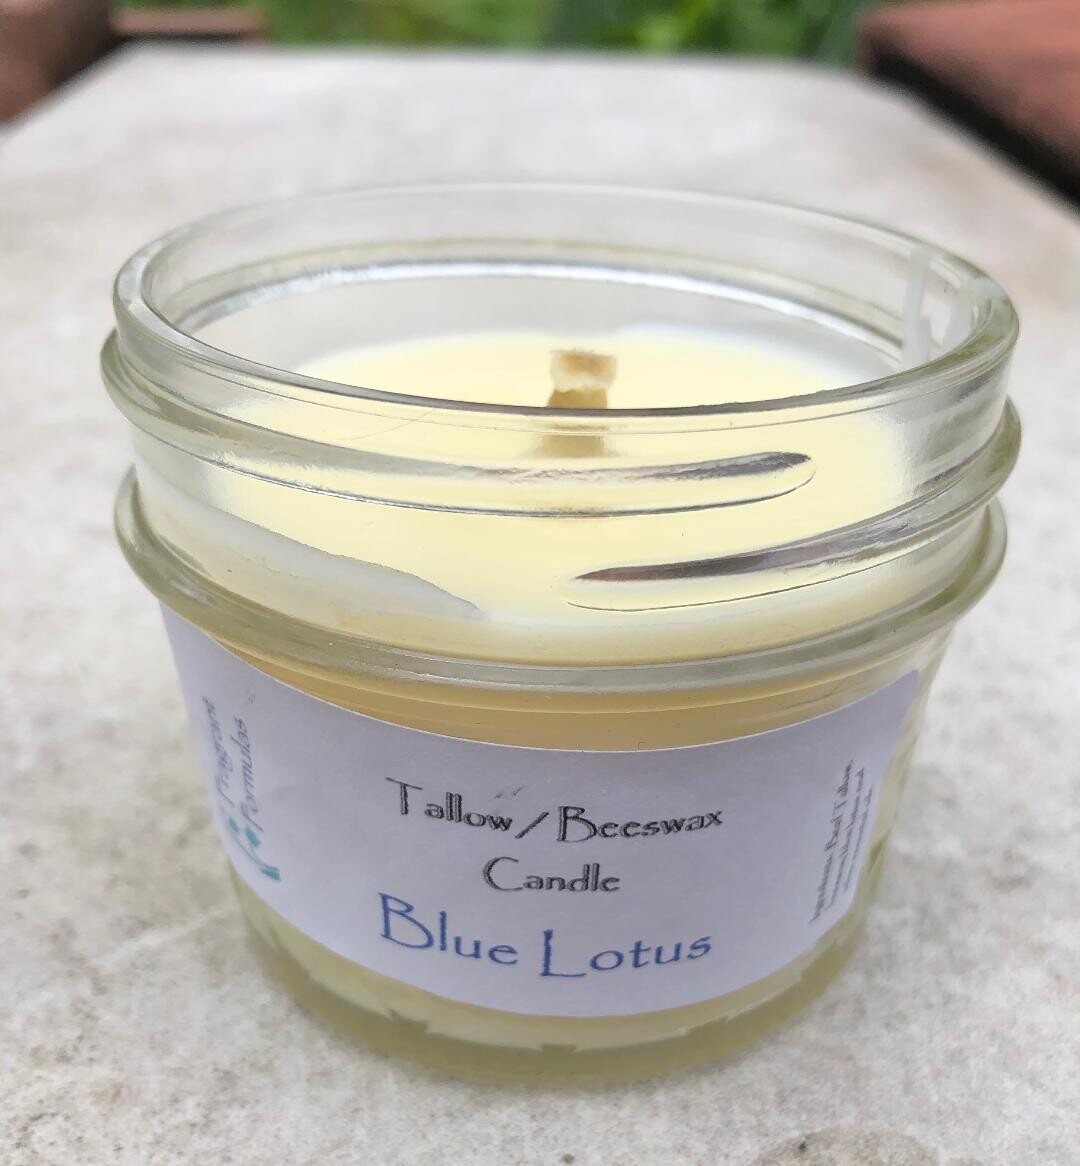 Blue Lotus Tallow/Beeswax Candle